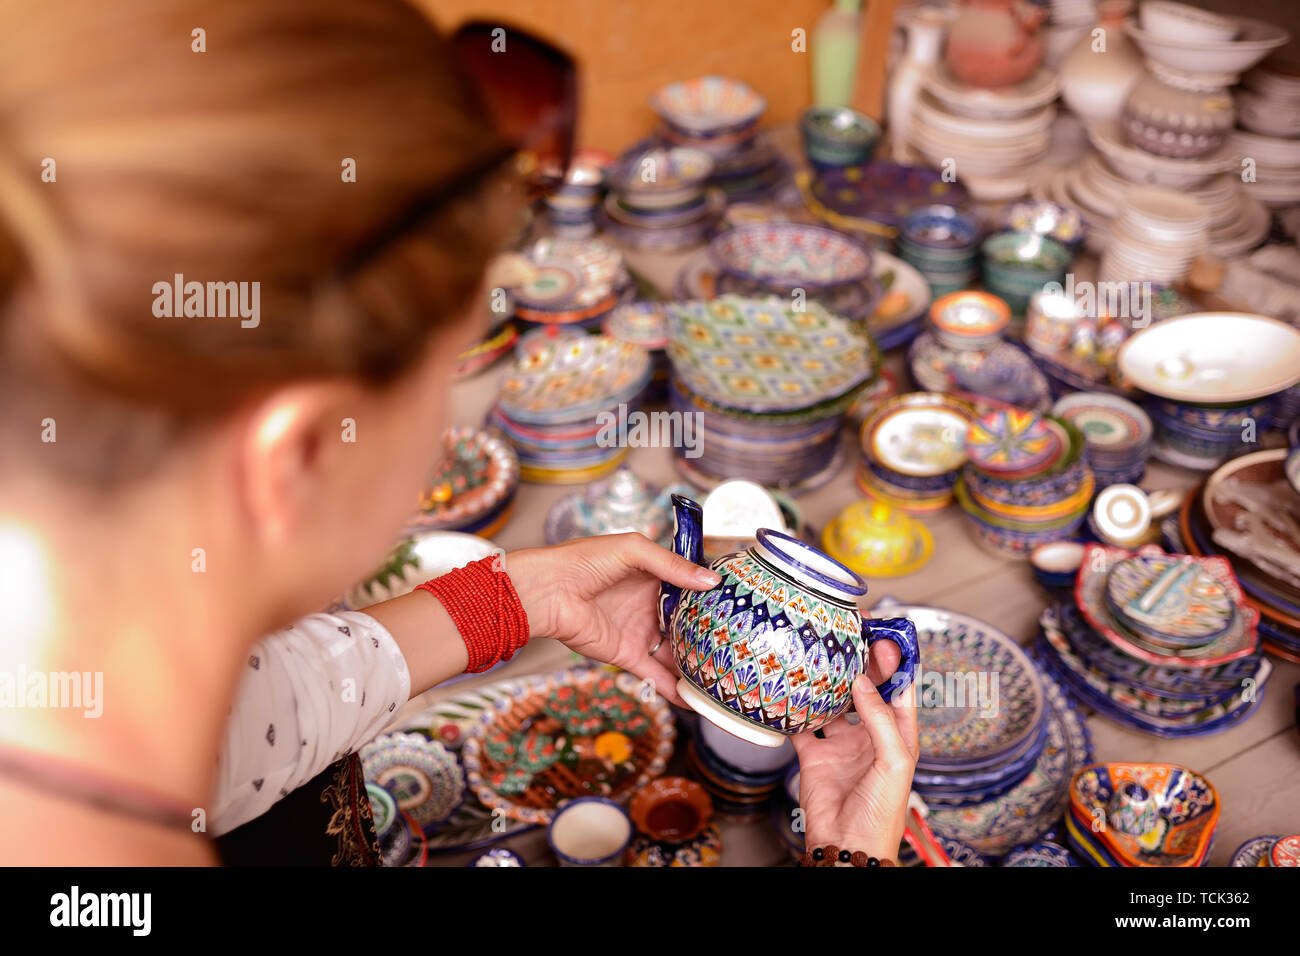 Watching tourist handmade colourful ceramic pottery with jug and cups selling at street stall in Rishton, Uzbekistan Stock Photo